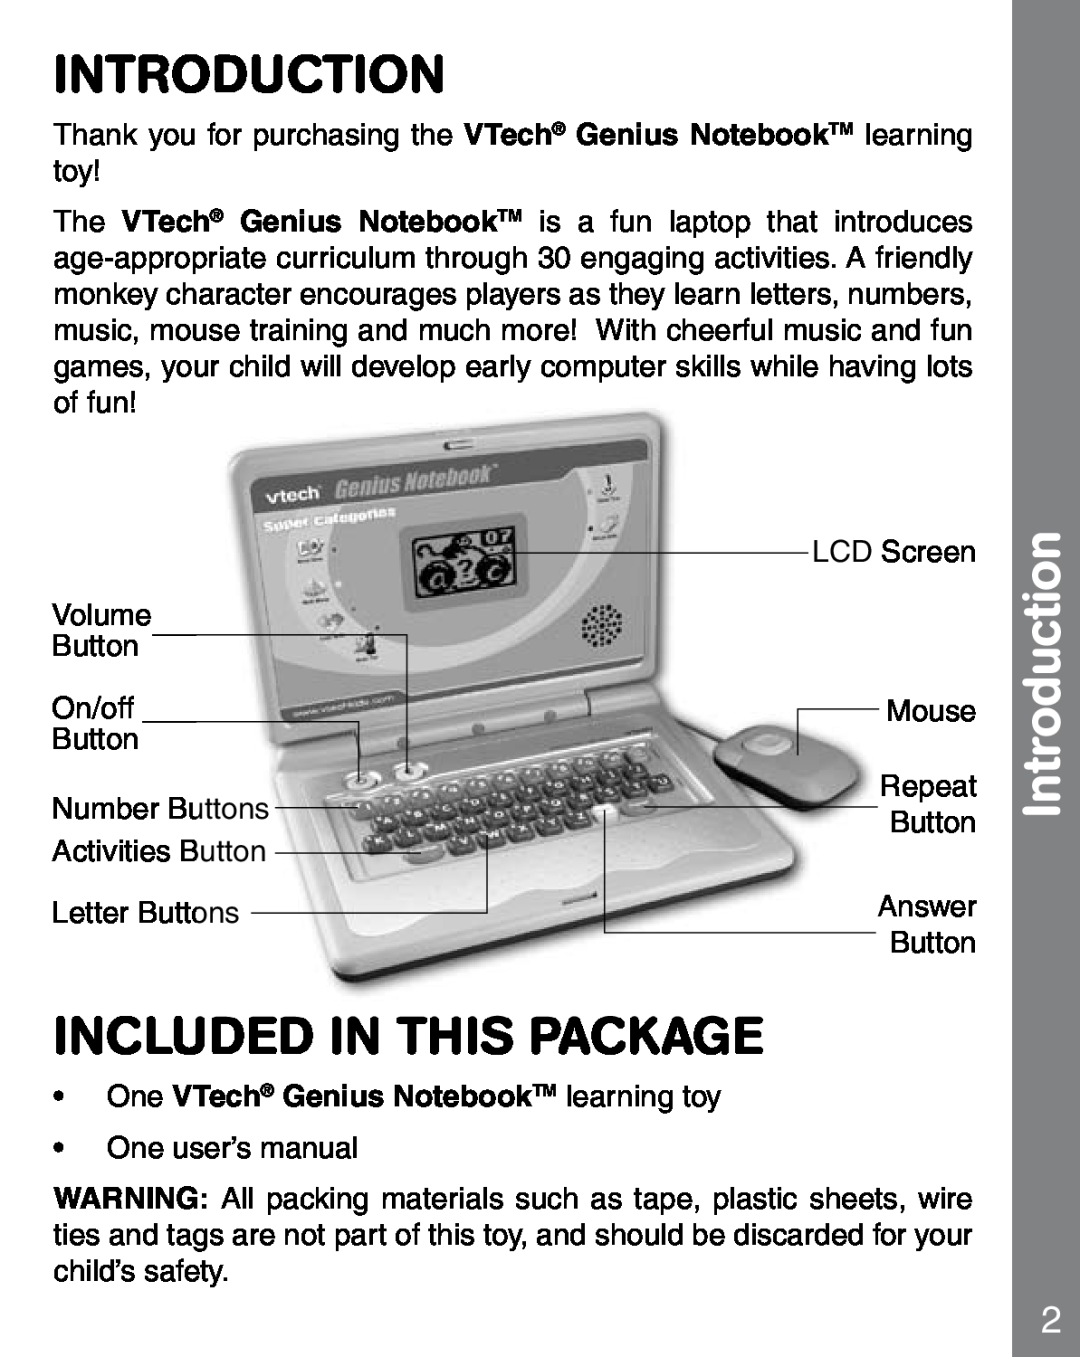 VTech 91-02241-000 manual Introduction, Included In This Package, One VTech Genius NotebookTM learning toy 